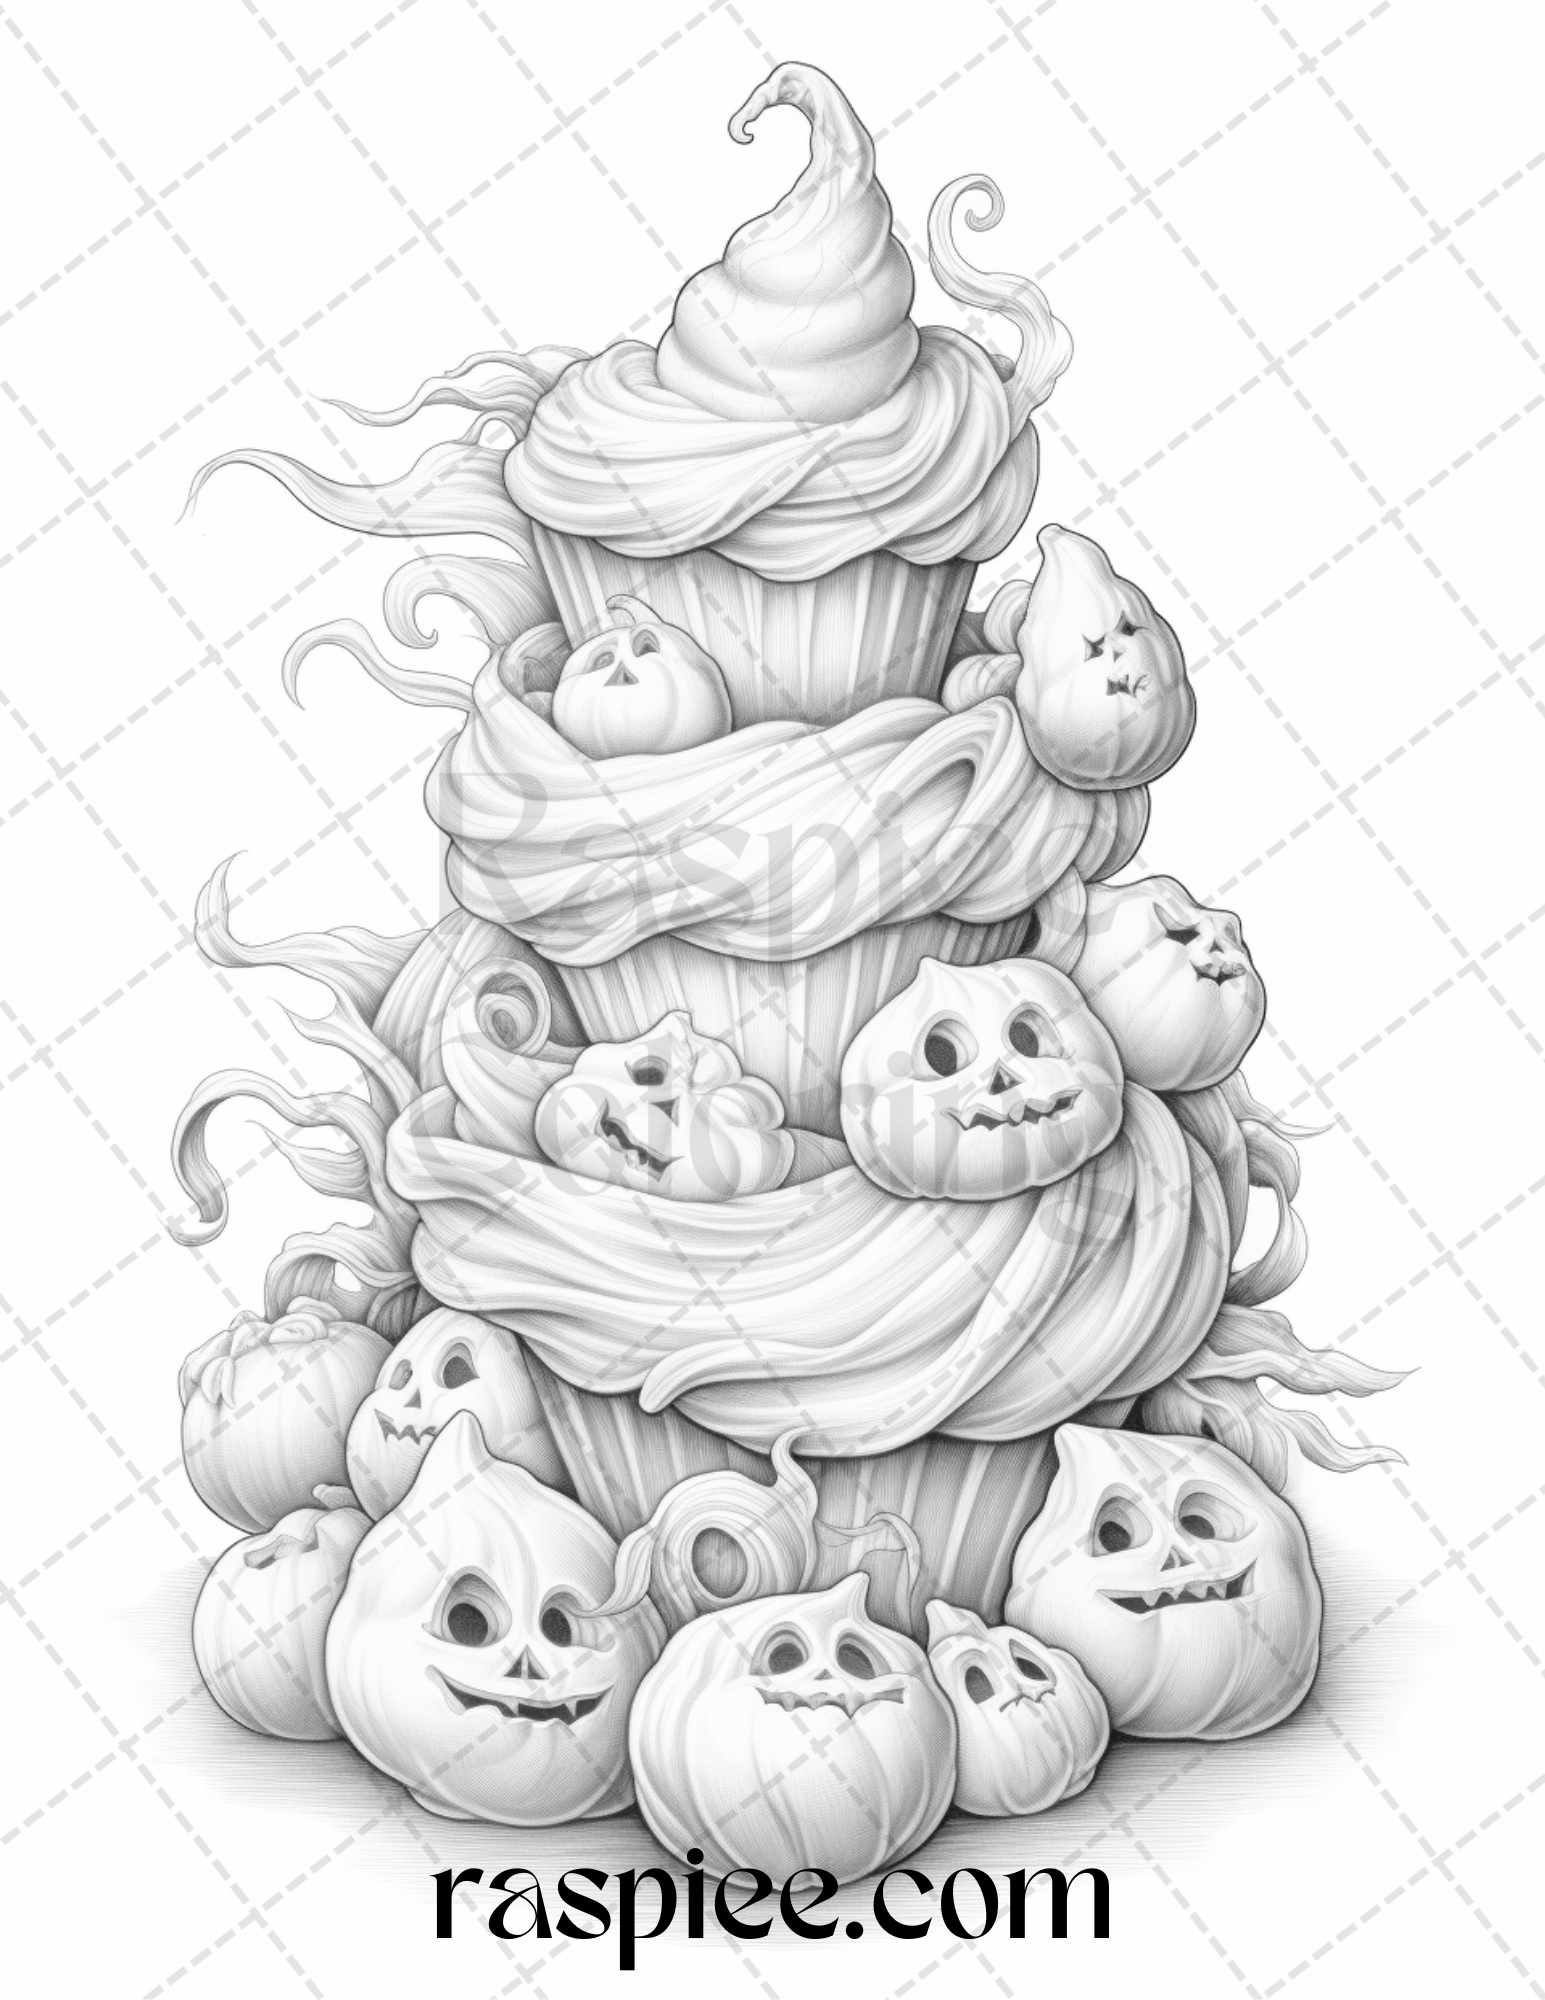 Halloween Spooky Desserts Grayscale Coloring Pages, Printable Adult Coloring Sheets, Ghostly Coloring Patterns, Relaxing Stress Relief Coloring Book, Spooky Desserts Creative Coloring